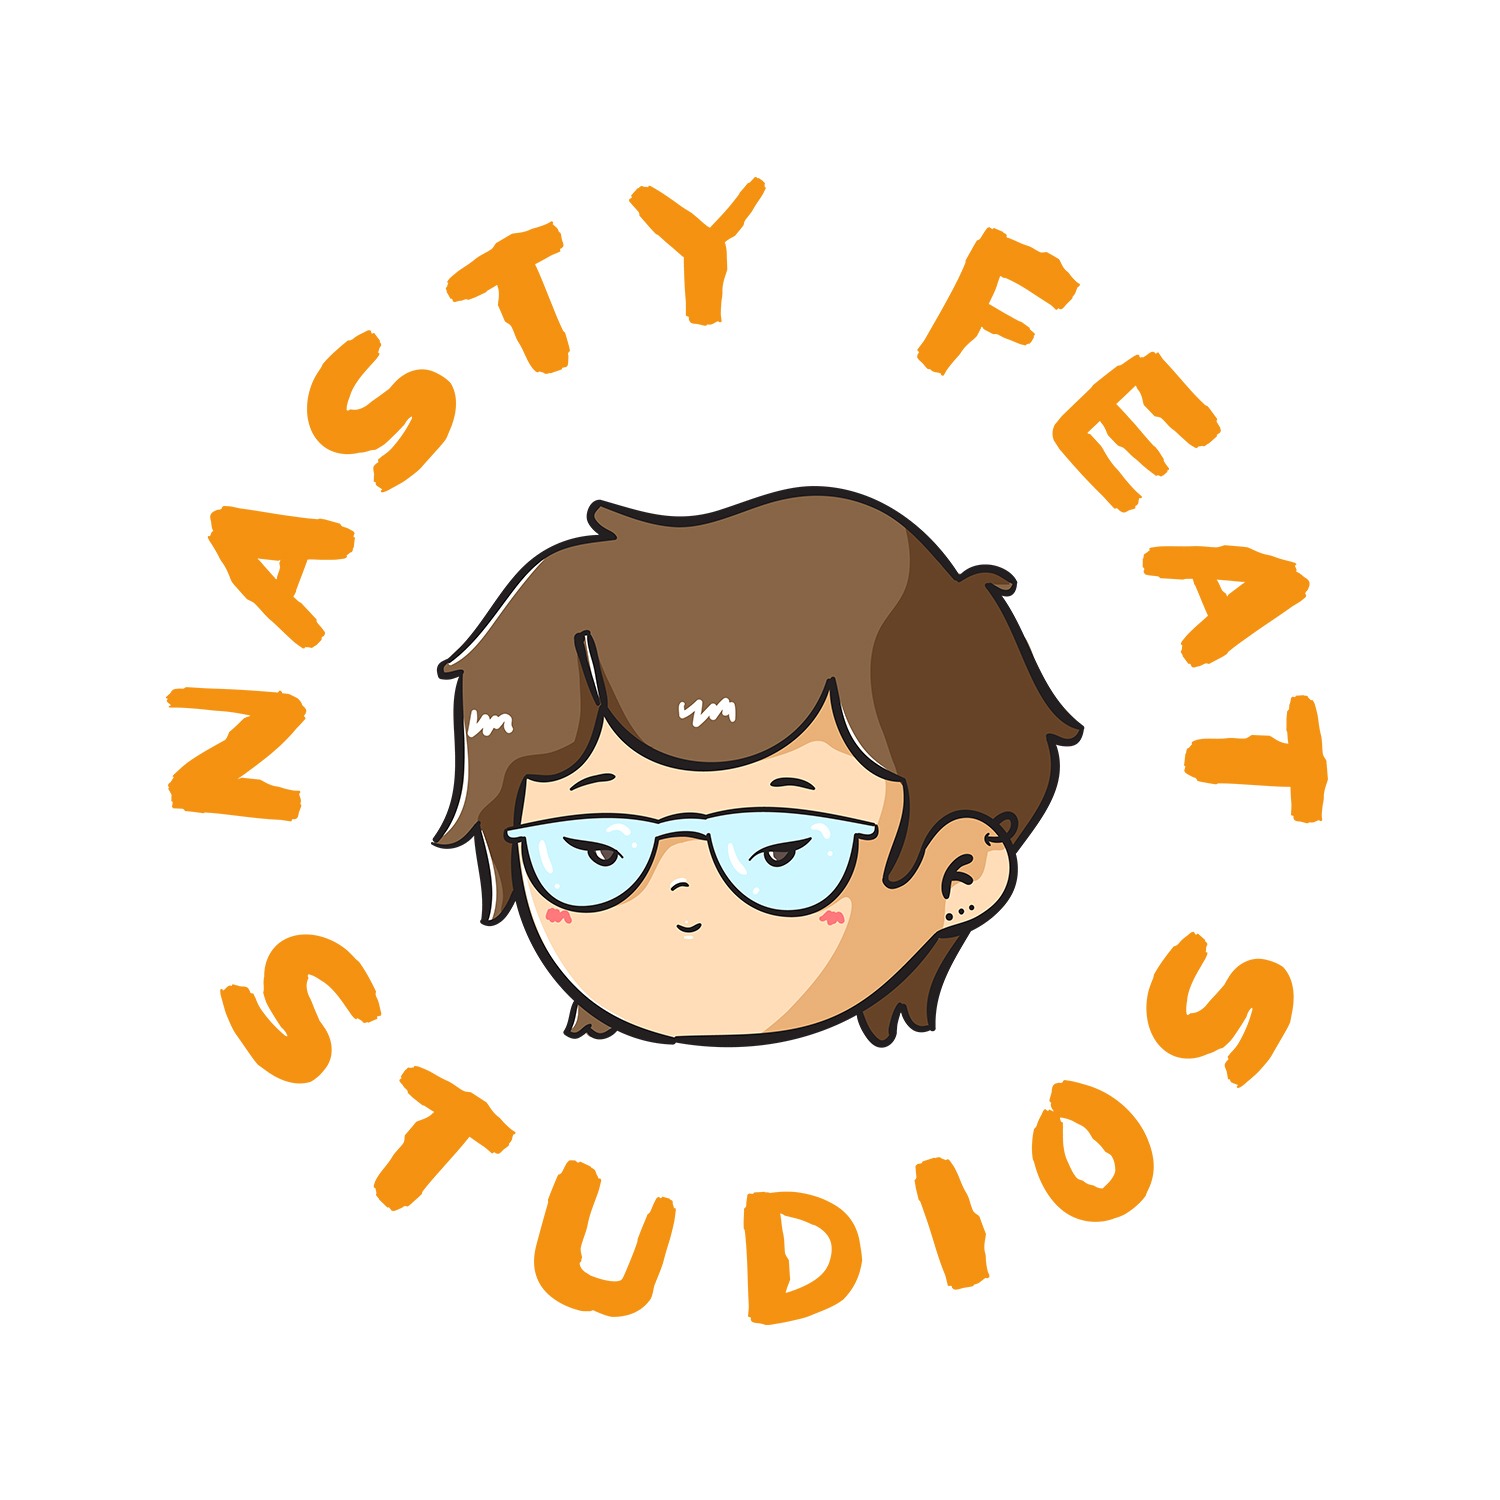 Nasty Feat Studios - New sticker pack alert! JUST CONYO THINGS 7 + 1  Waterproof leather laminate stickers Now available Shopee link below